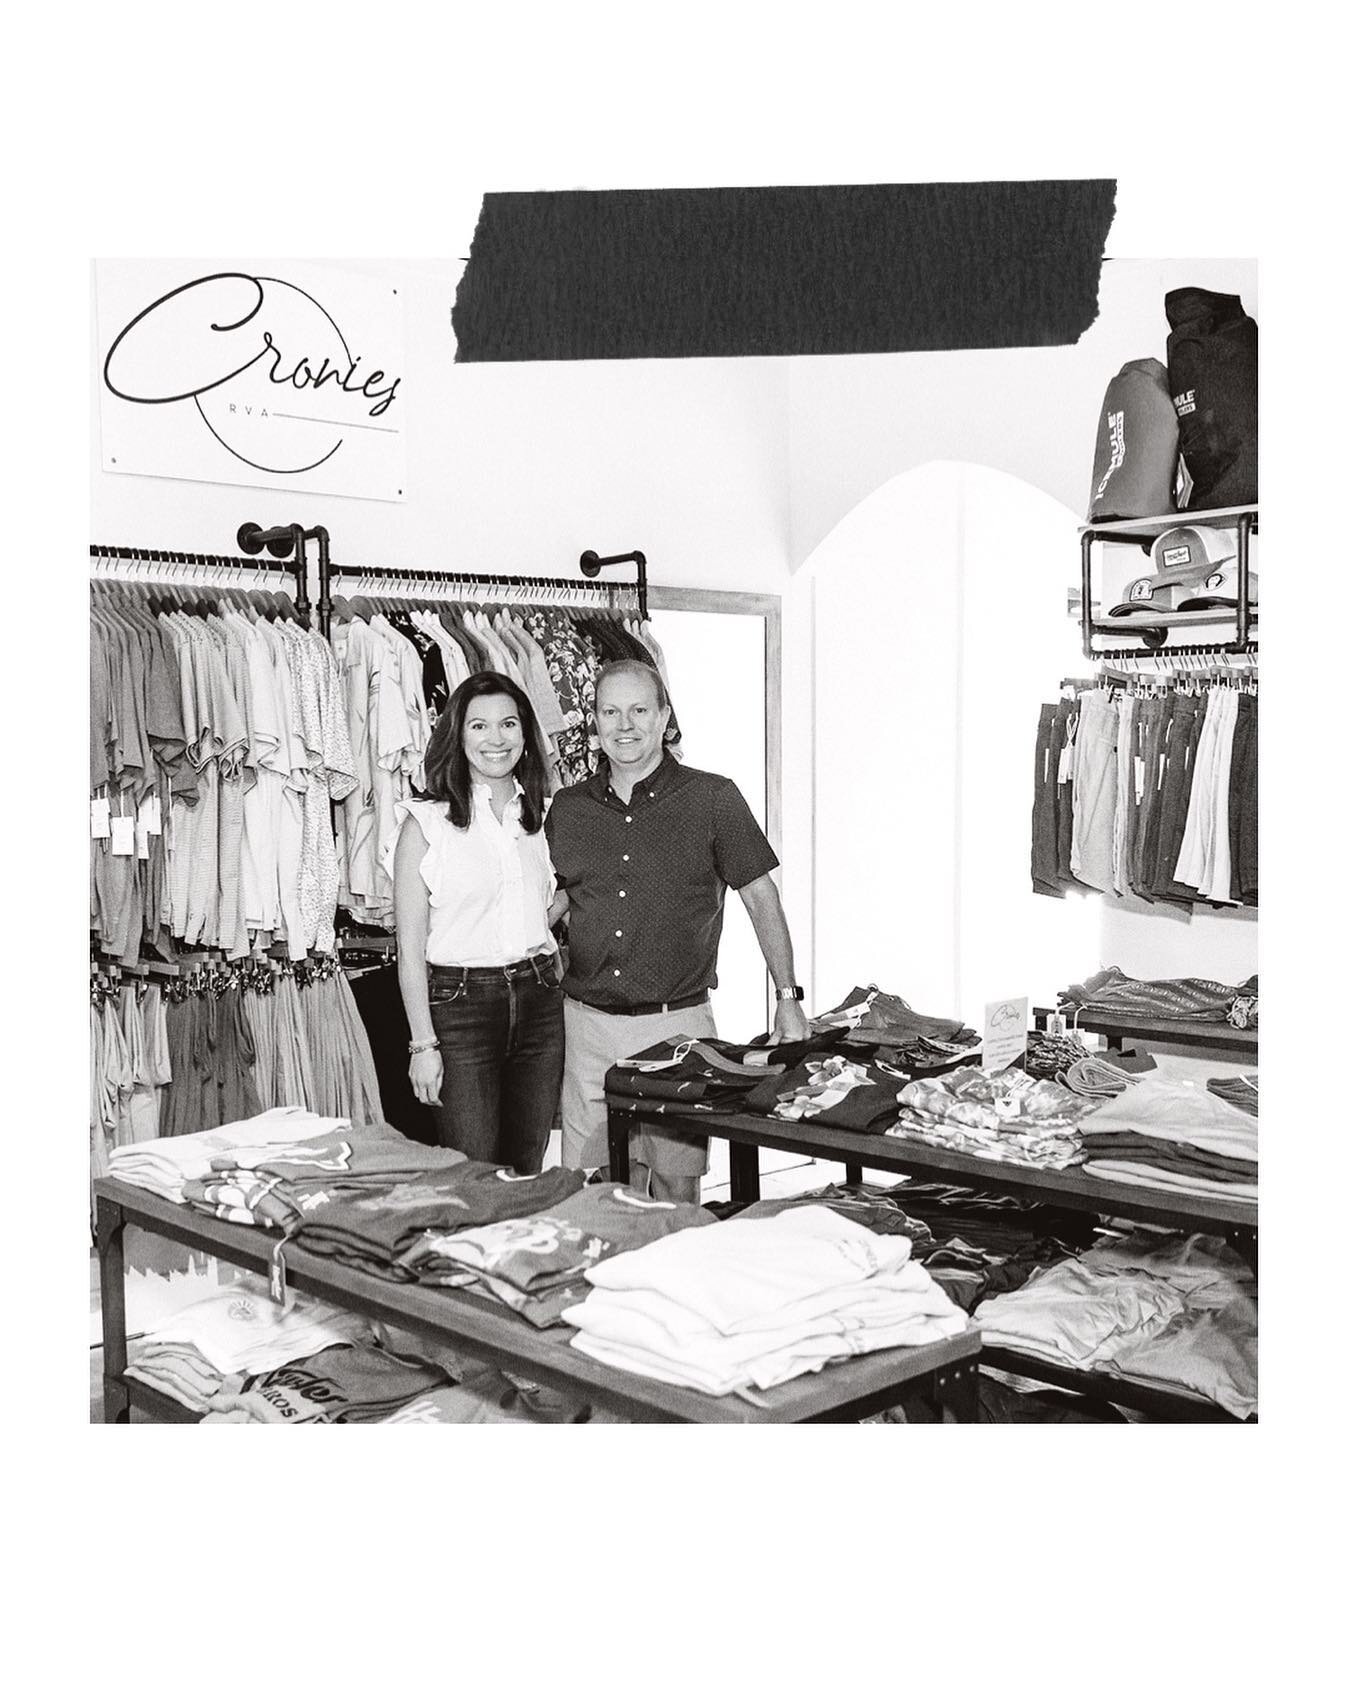 cronies // shops at 5807, rva

so excited for alyson + mike to be featured in richmond biz sense today. if you&rsquo;re in rva check out this men&rsquo;s store this weekend during &ldquo;Party on the Avenues&rdquo; + all the other stores within the s